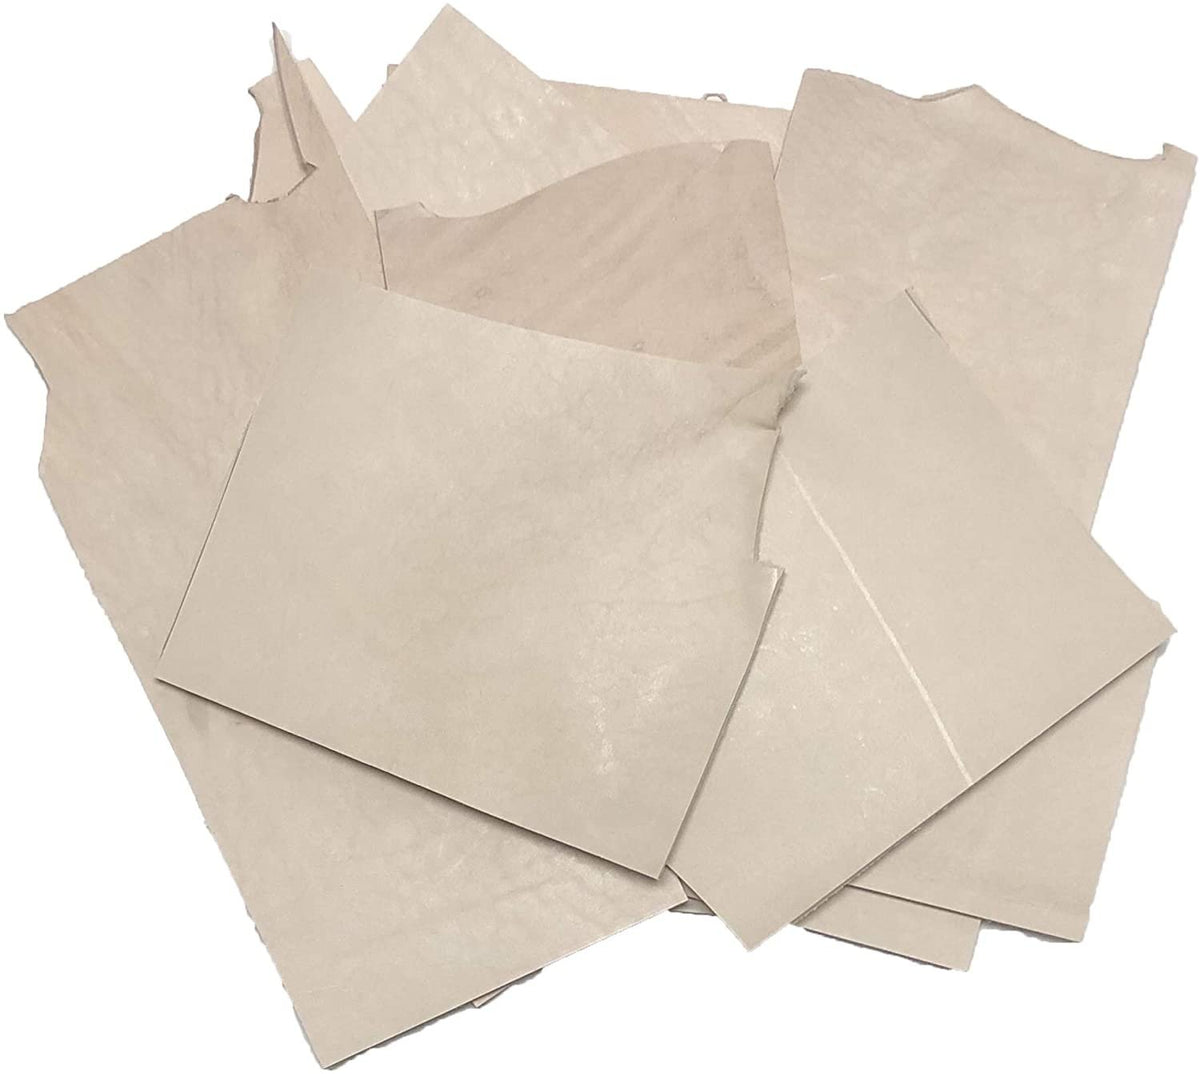 Leather Scraps - Pieces of Leather in White/Grey Ideal for Craft Works,  Extra Large, Quality Genuine Leather, Repair Bags, Textiles, Covering